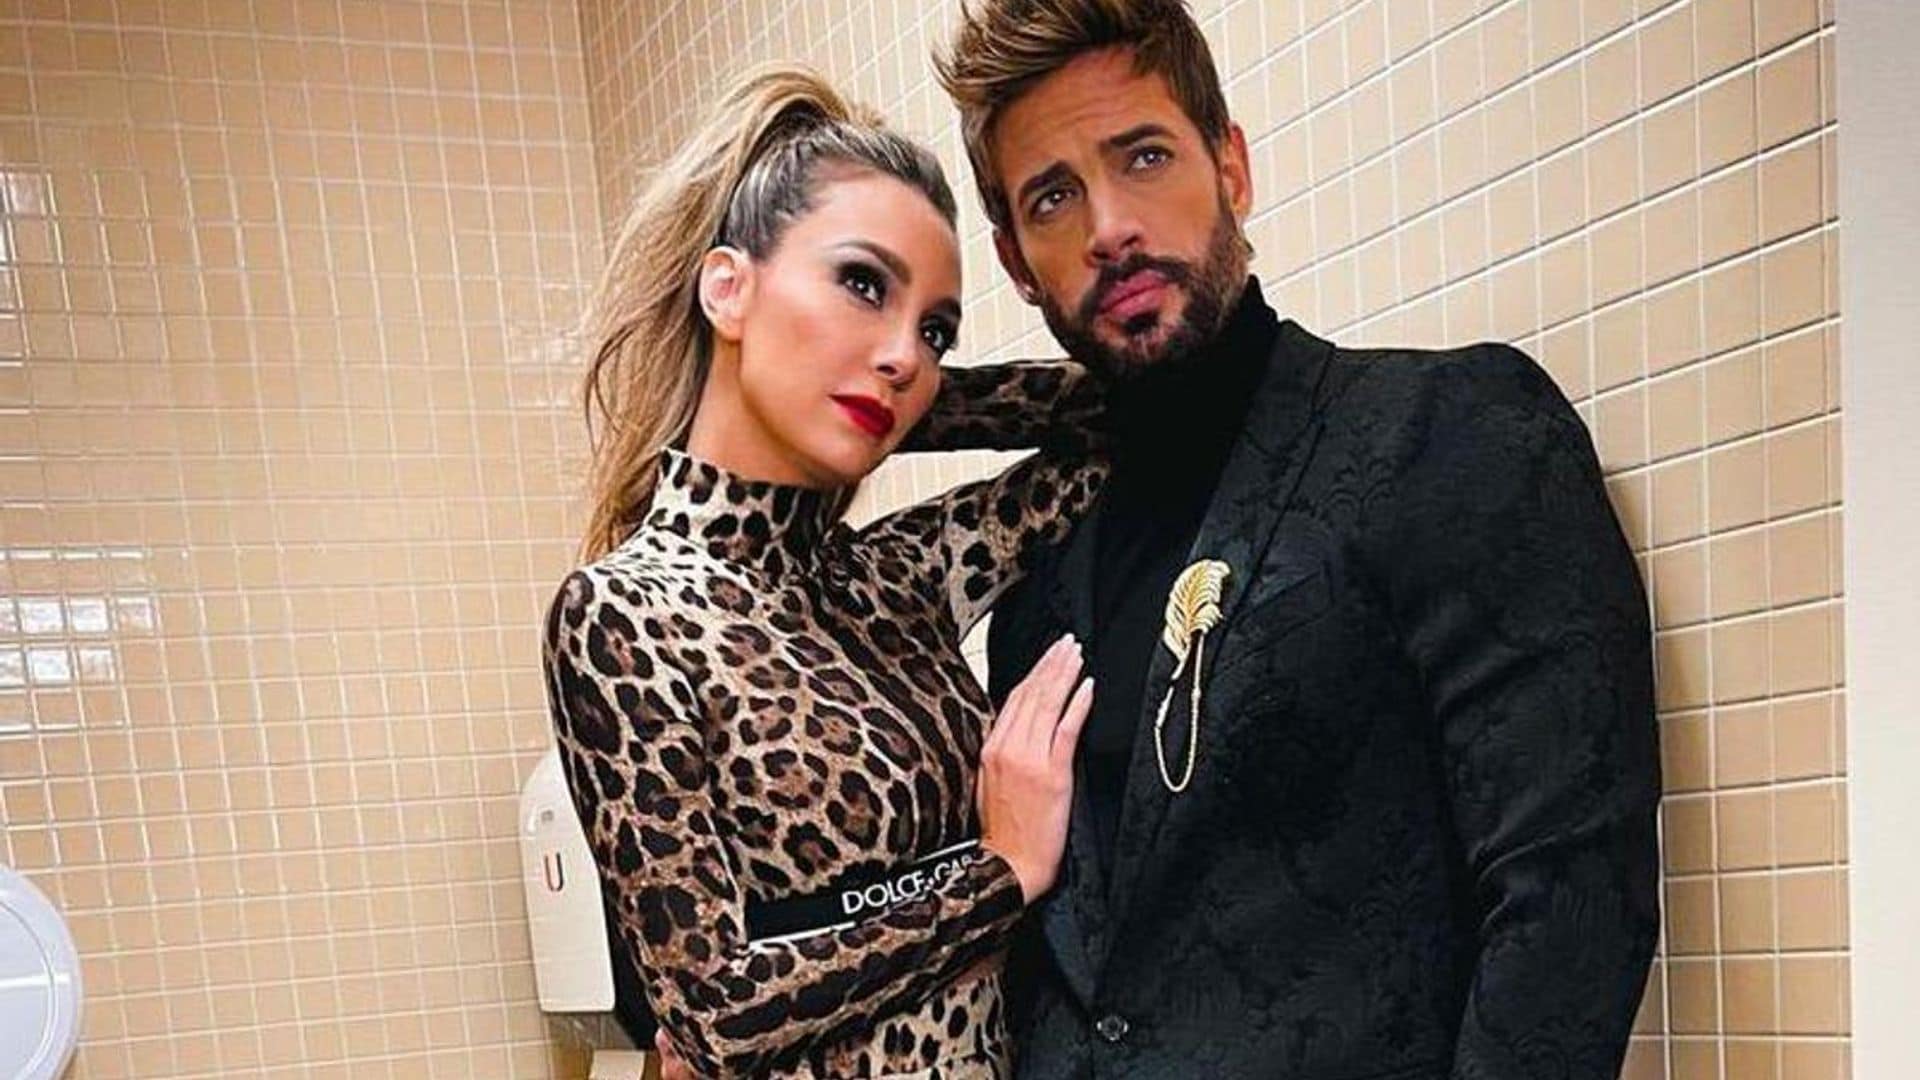 William Levy and the mysterious post about his relationship with Elizabeth Gutiérrez